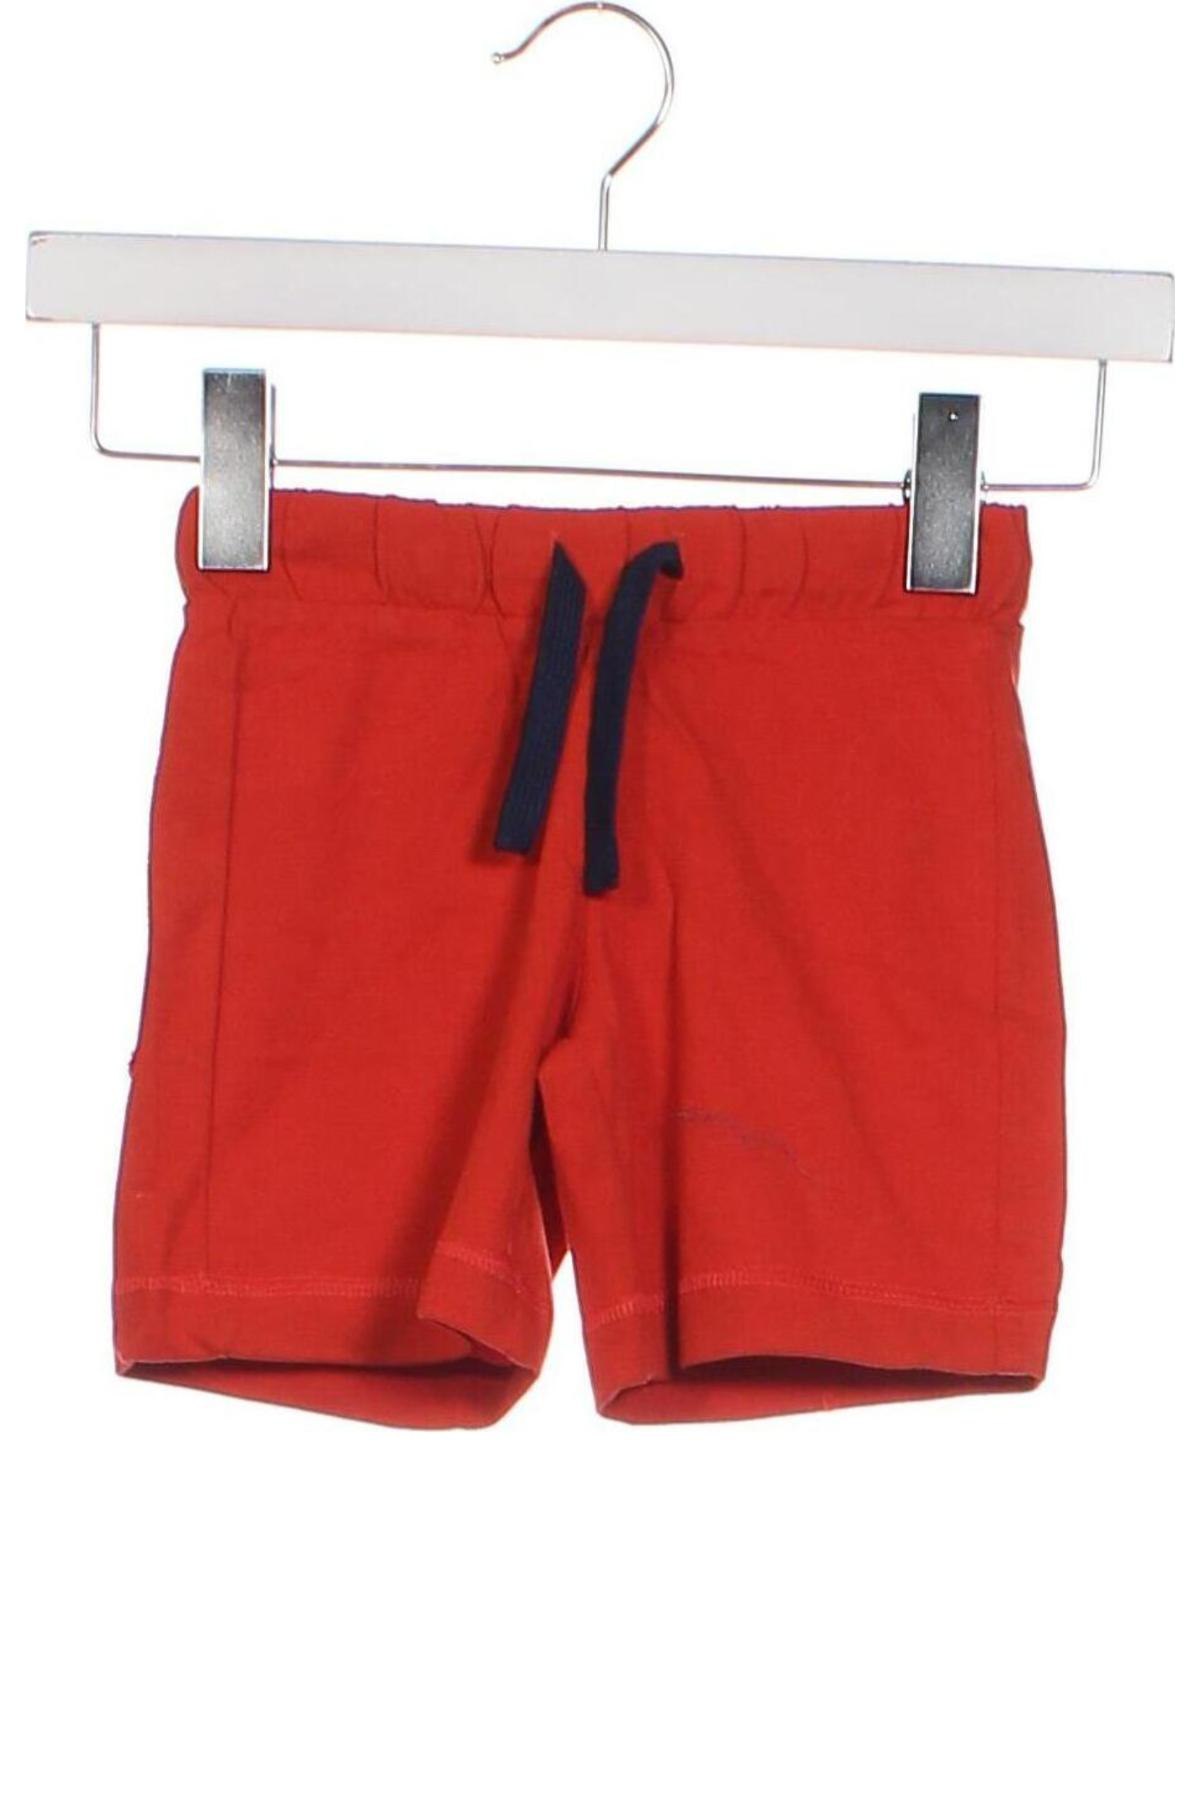 Kinder Shorts United Colors Of Benetton, Größe 12-18m/ 80-86 cm, Farbe Rot, Preis 13,15 €